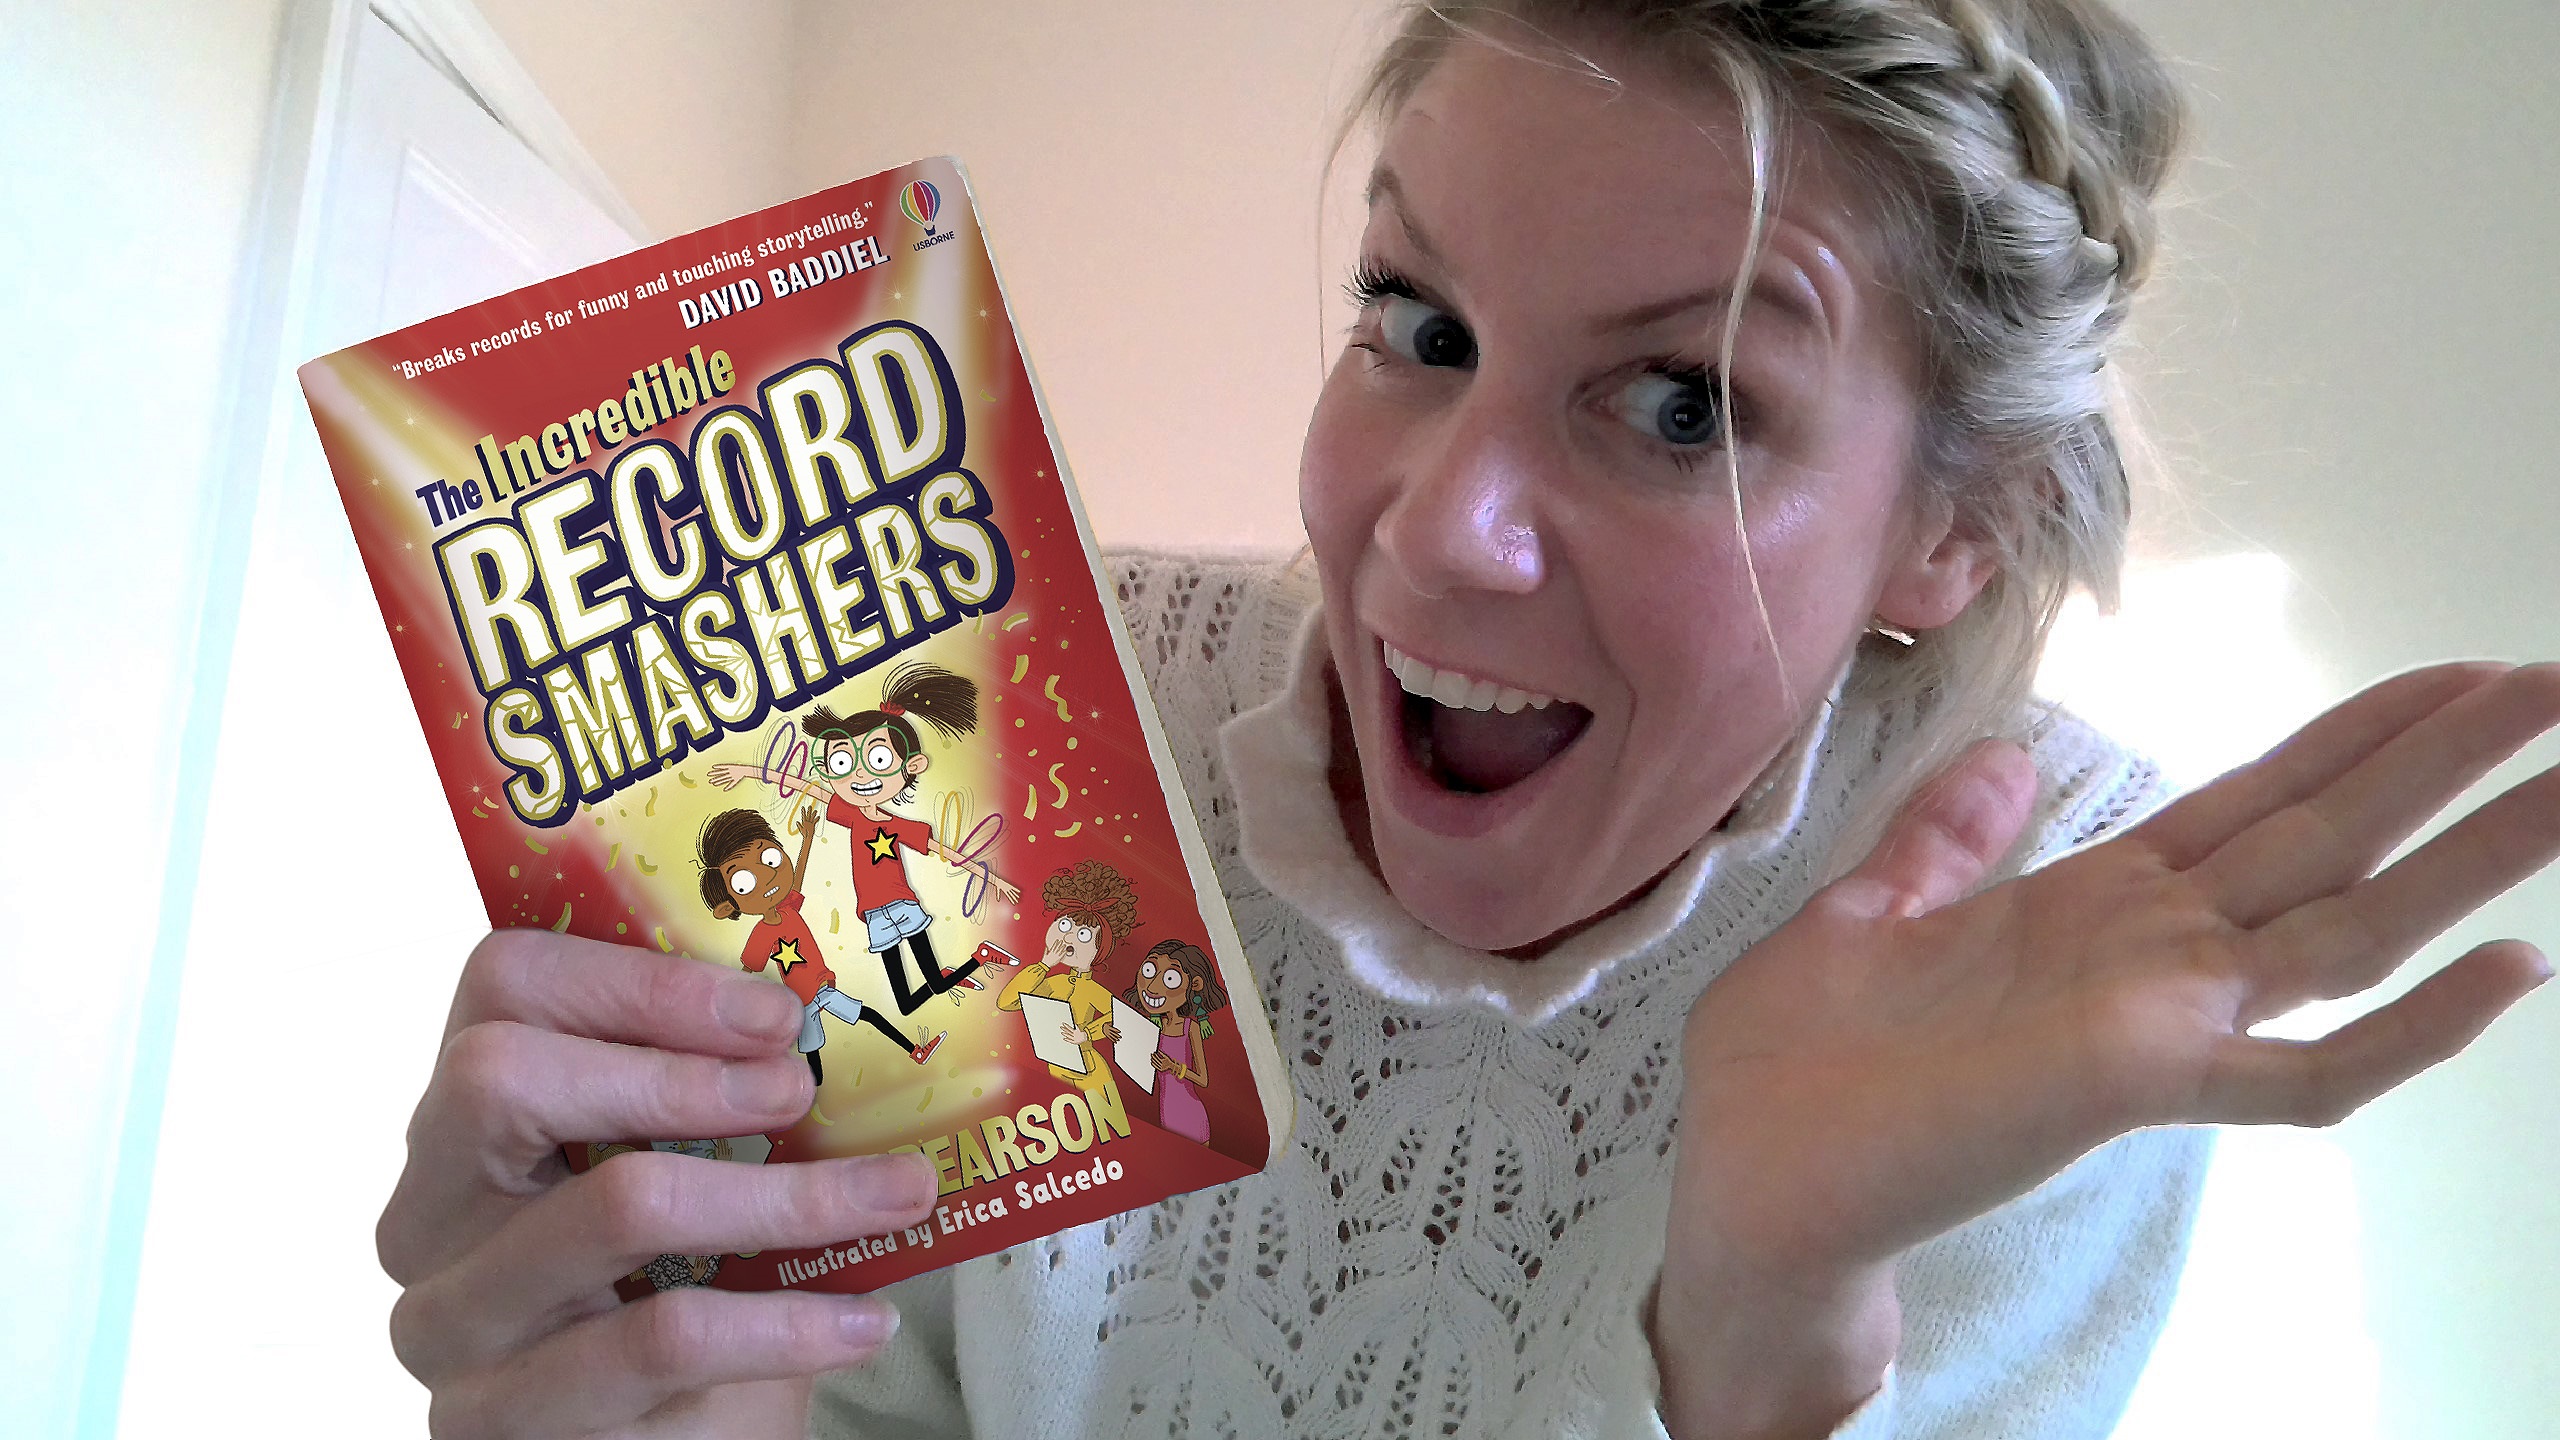 Jenny Pearson introduces The Incredible Record Smashers